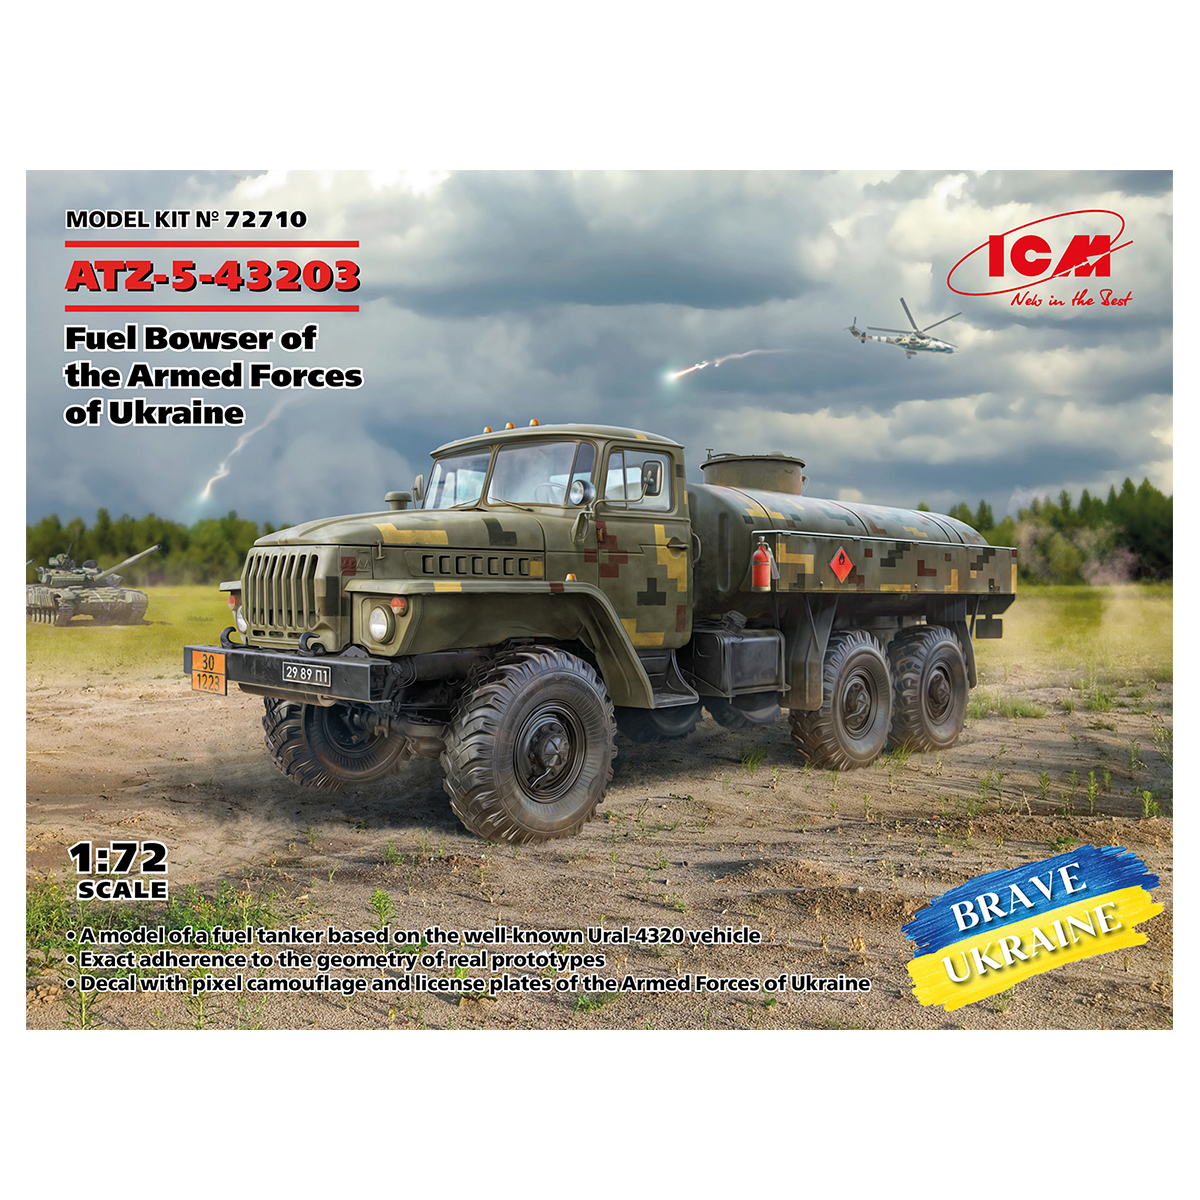 ATZ-5-43203, Fuel Bowser of the Armed Forces of Ukraine 1/72